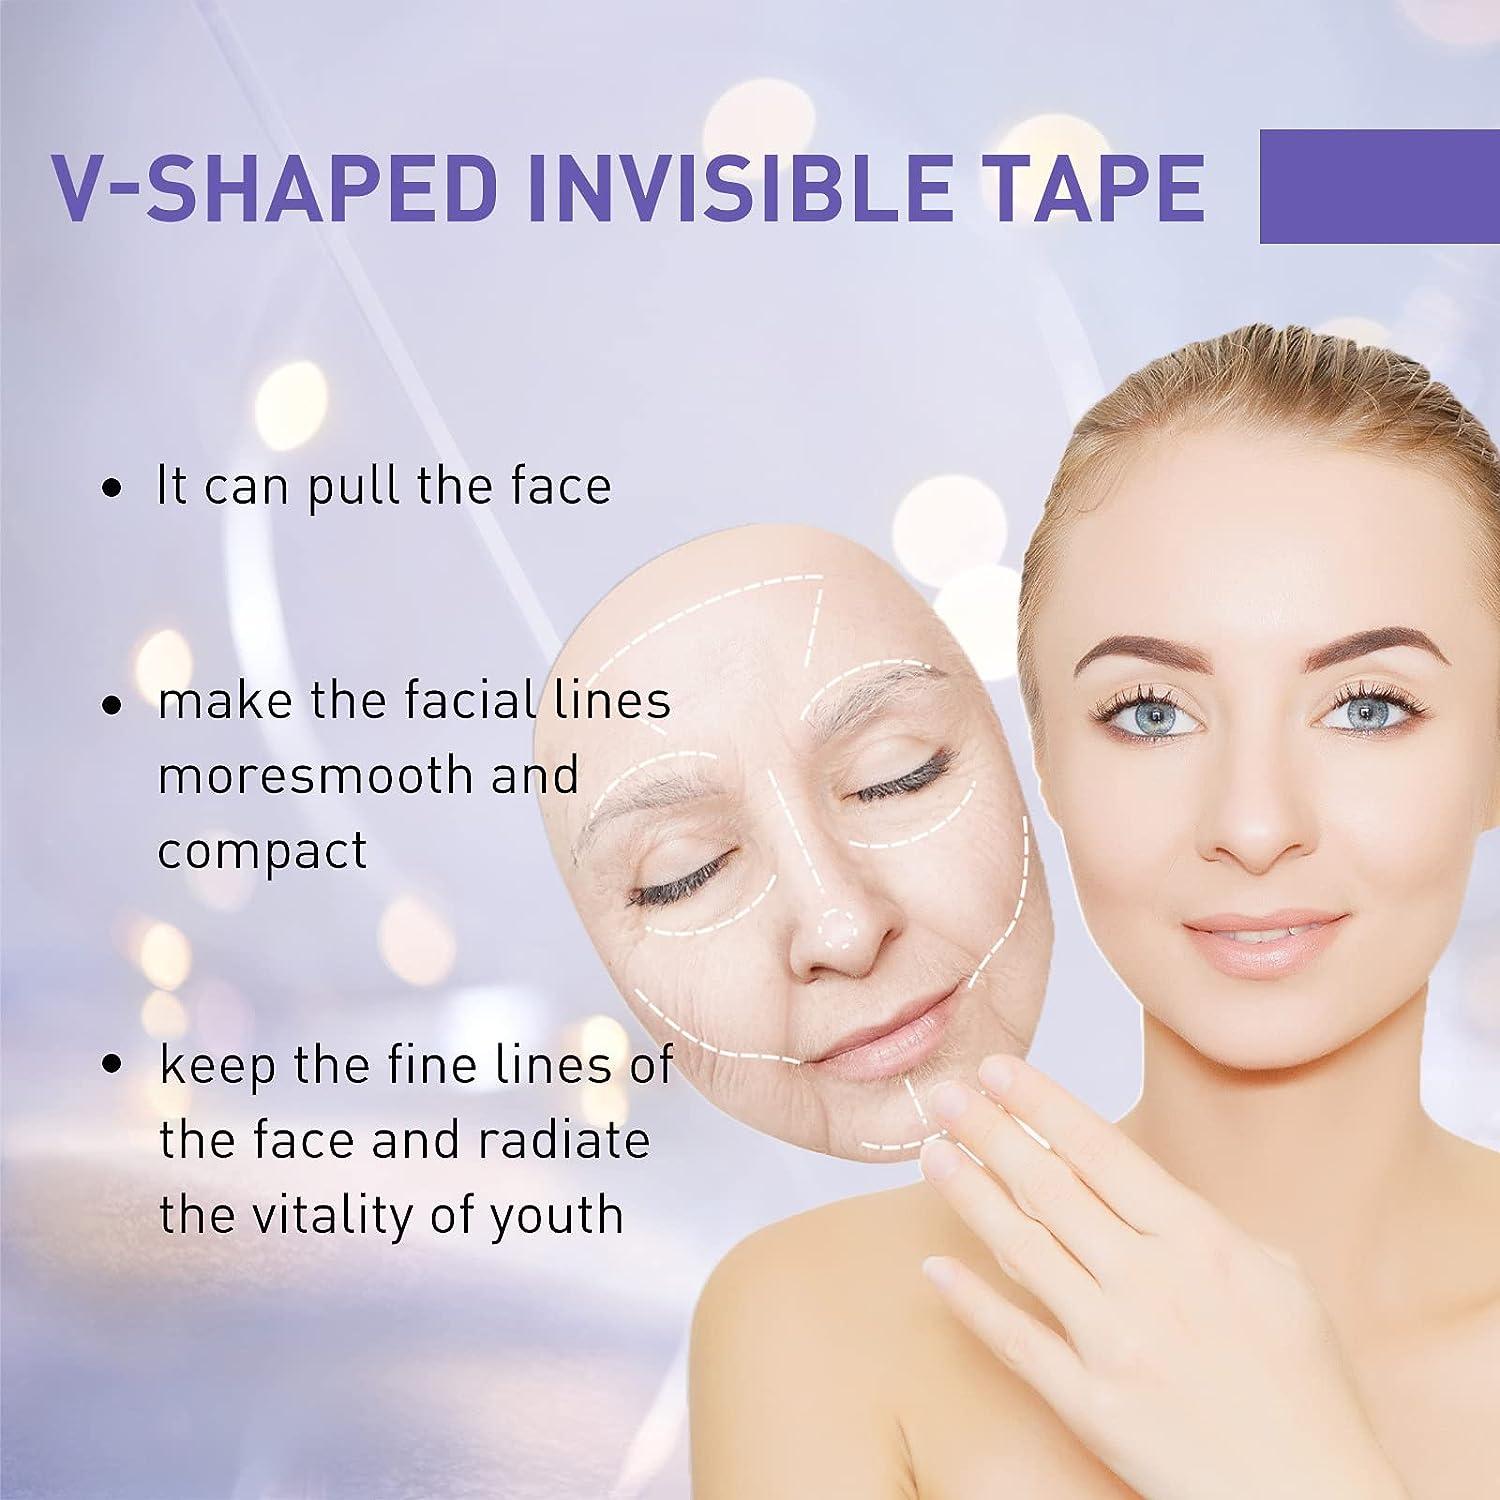 40 Pcs Face Tape Lifting Invisible with String for Wrinkles, Jowls, Neck,  Eye, Waterproof High Elasticity V Shape Lift Tape Stickers, Instant Makeup